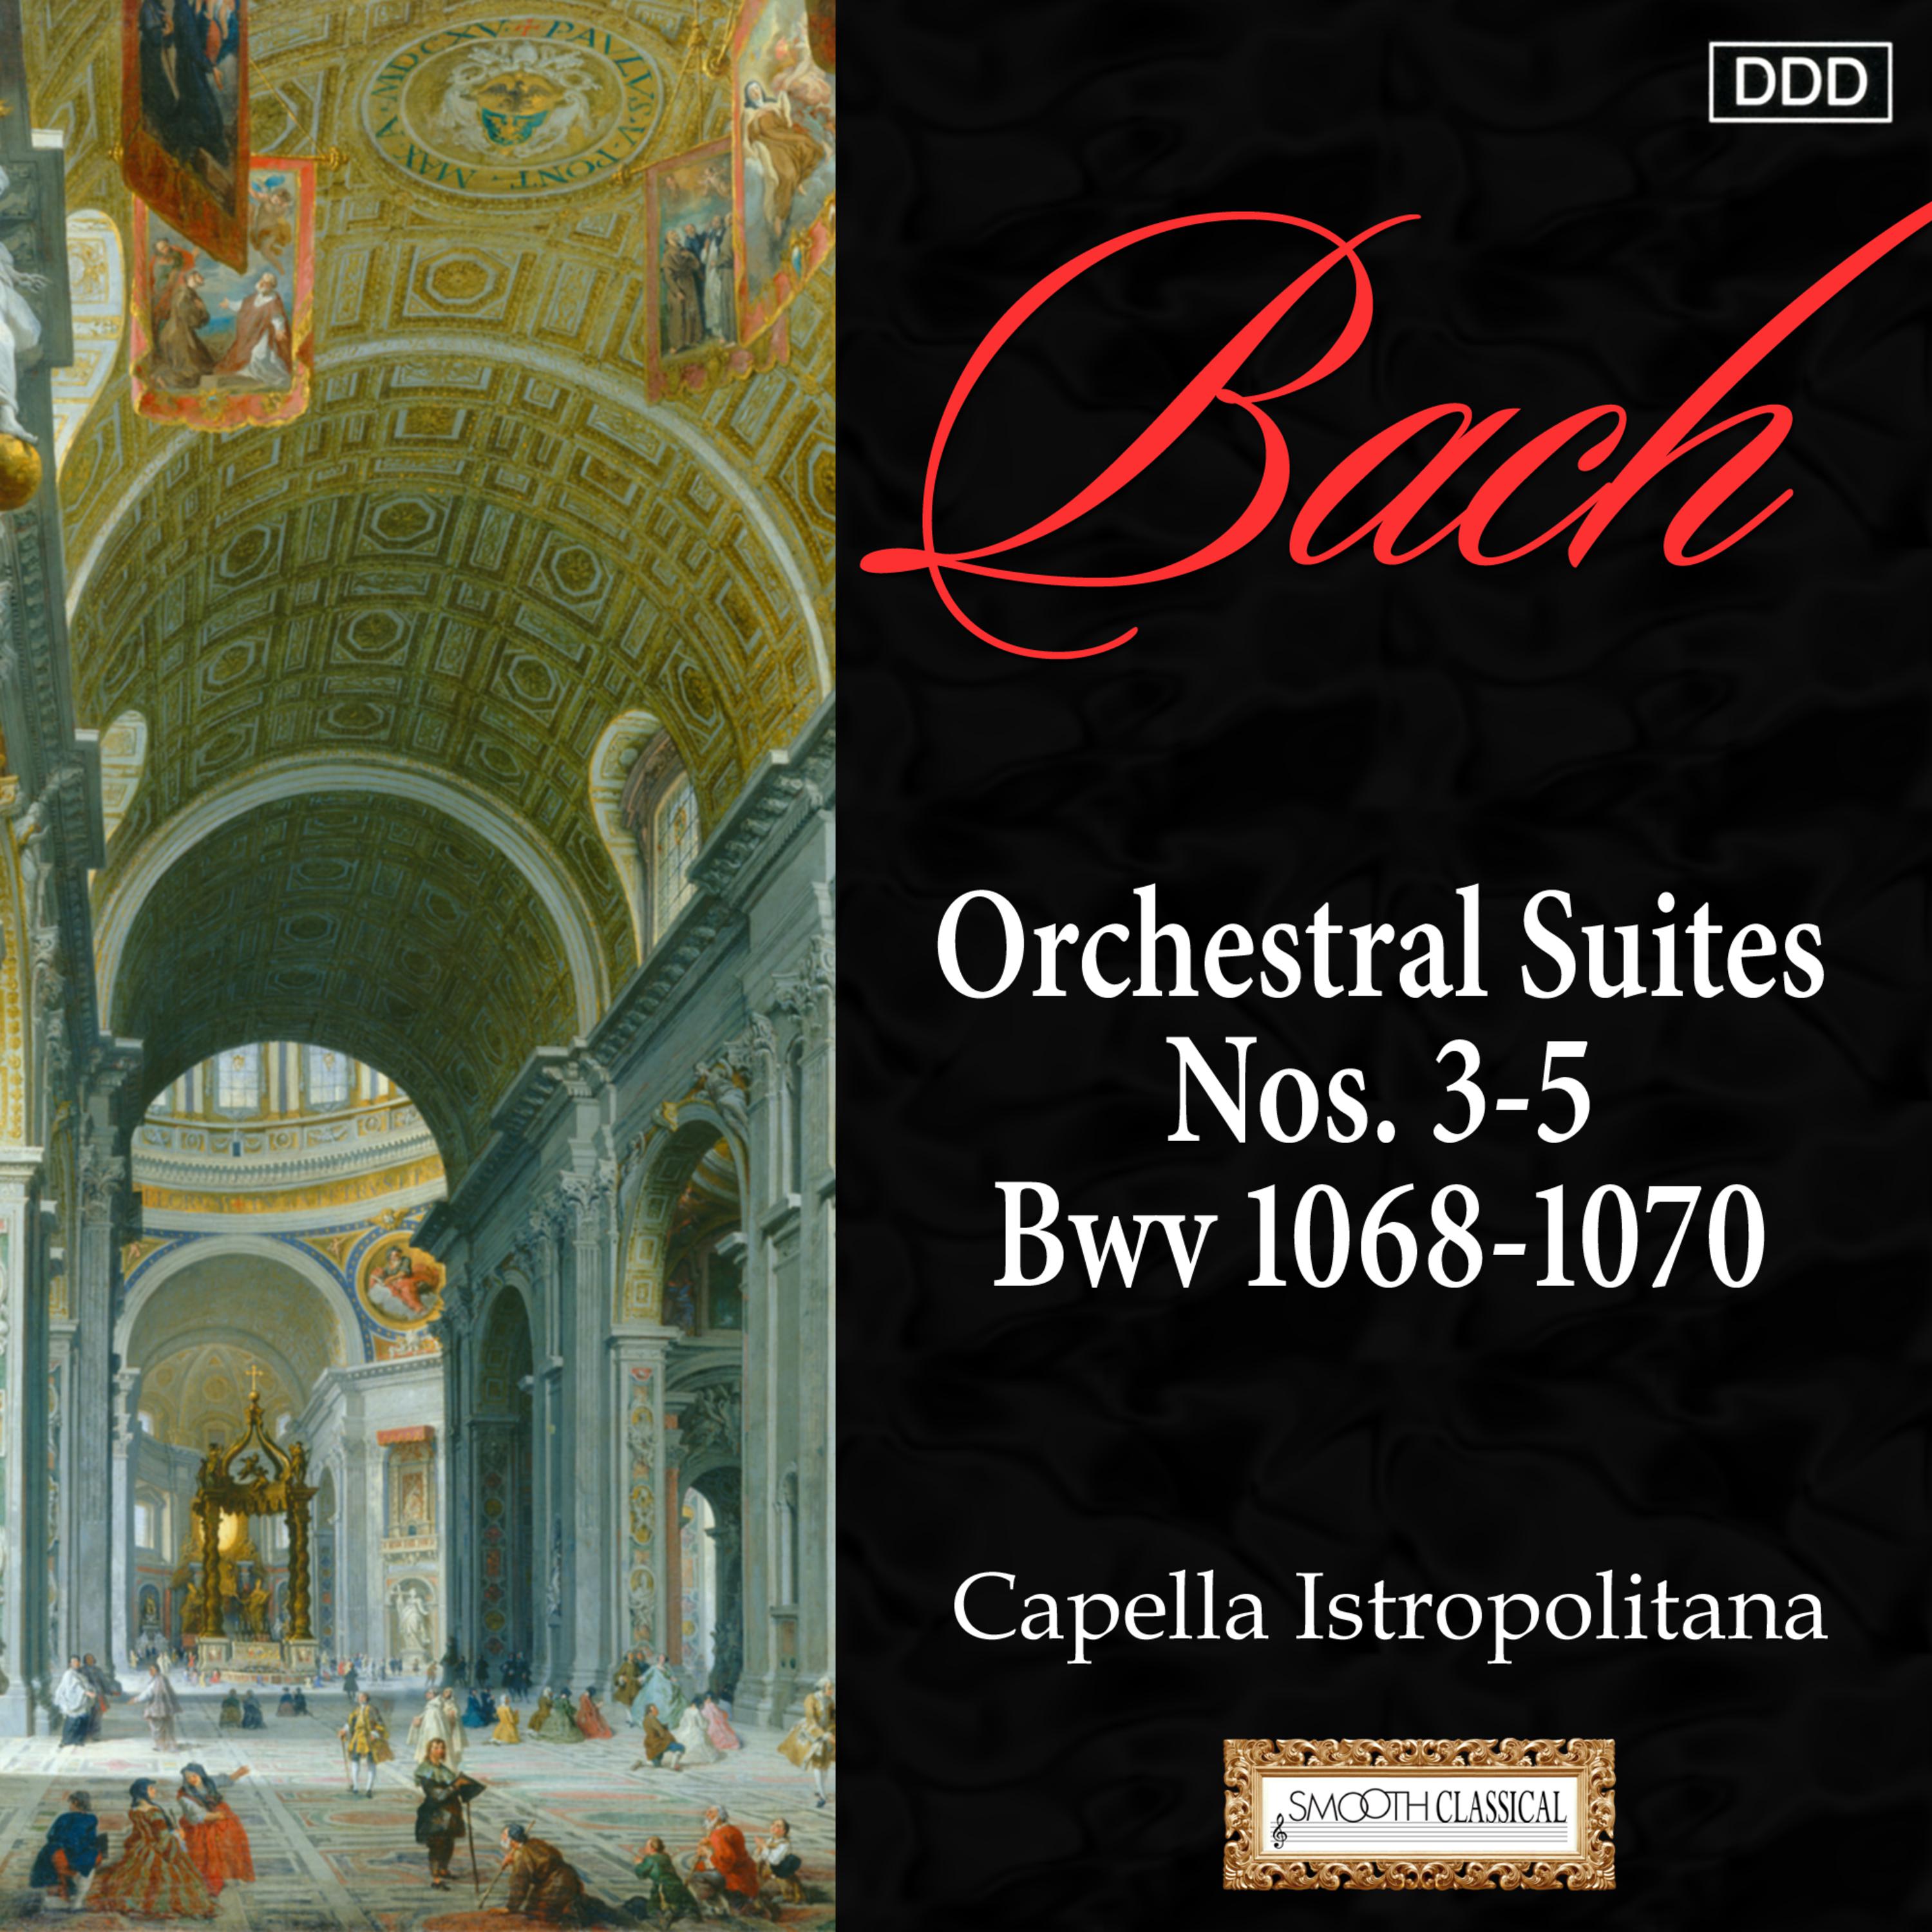 Orchestral Suite No. 4 in D Major, BWV 1069: IV. Menuet I and II